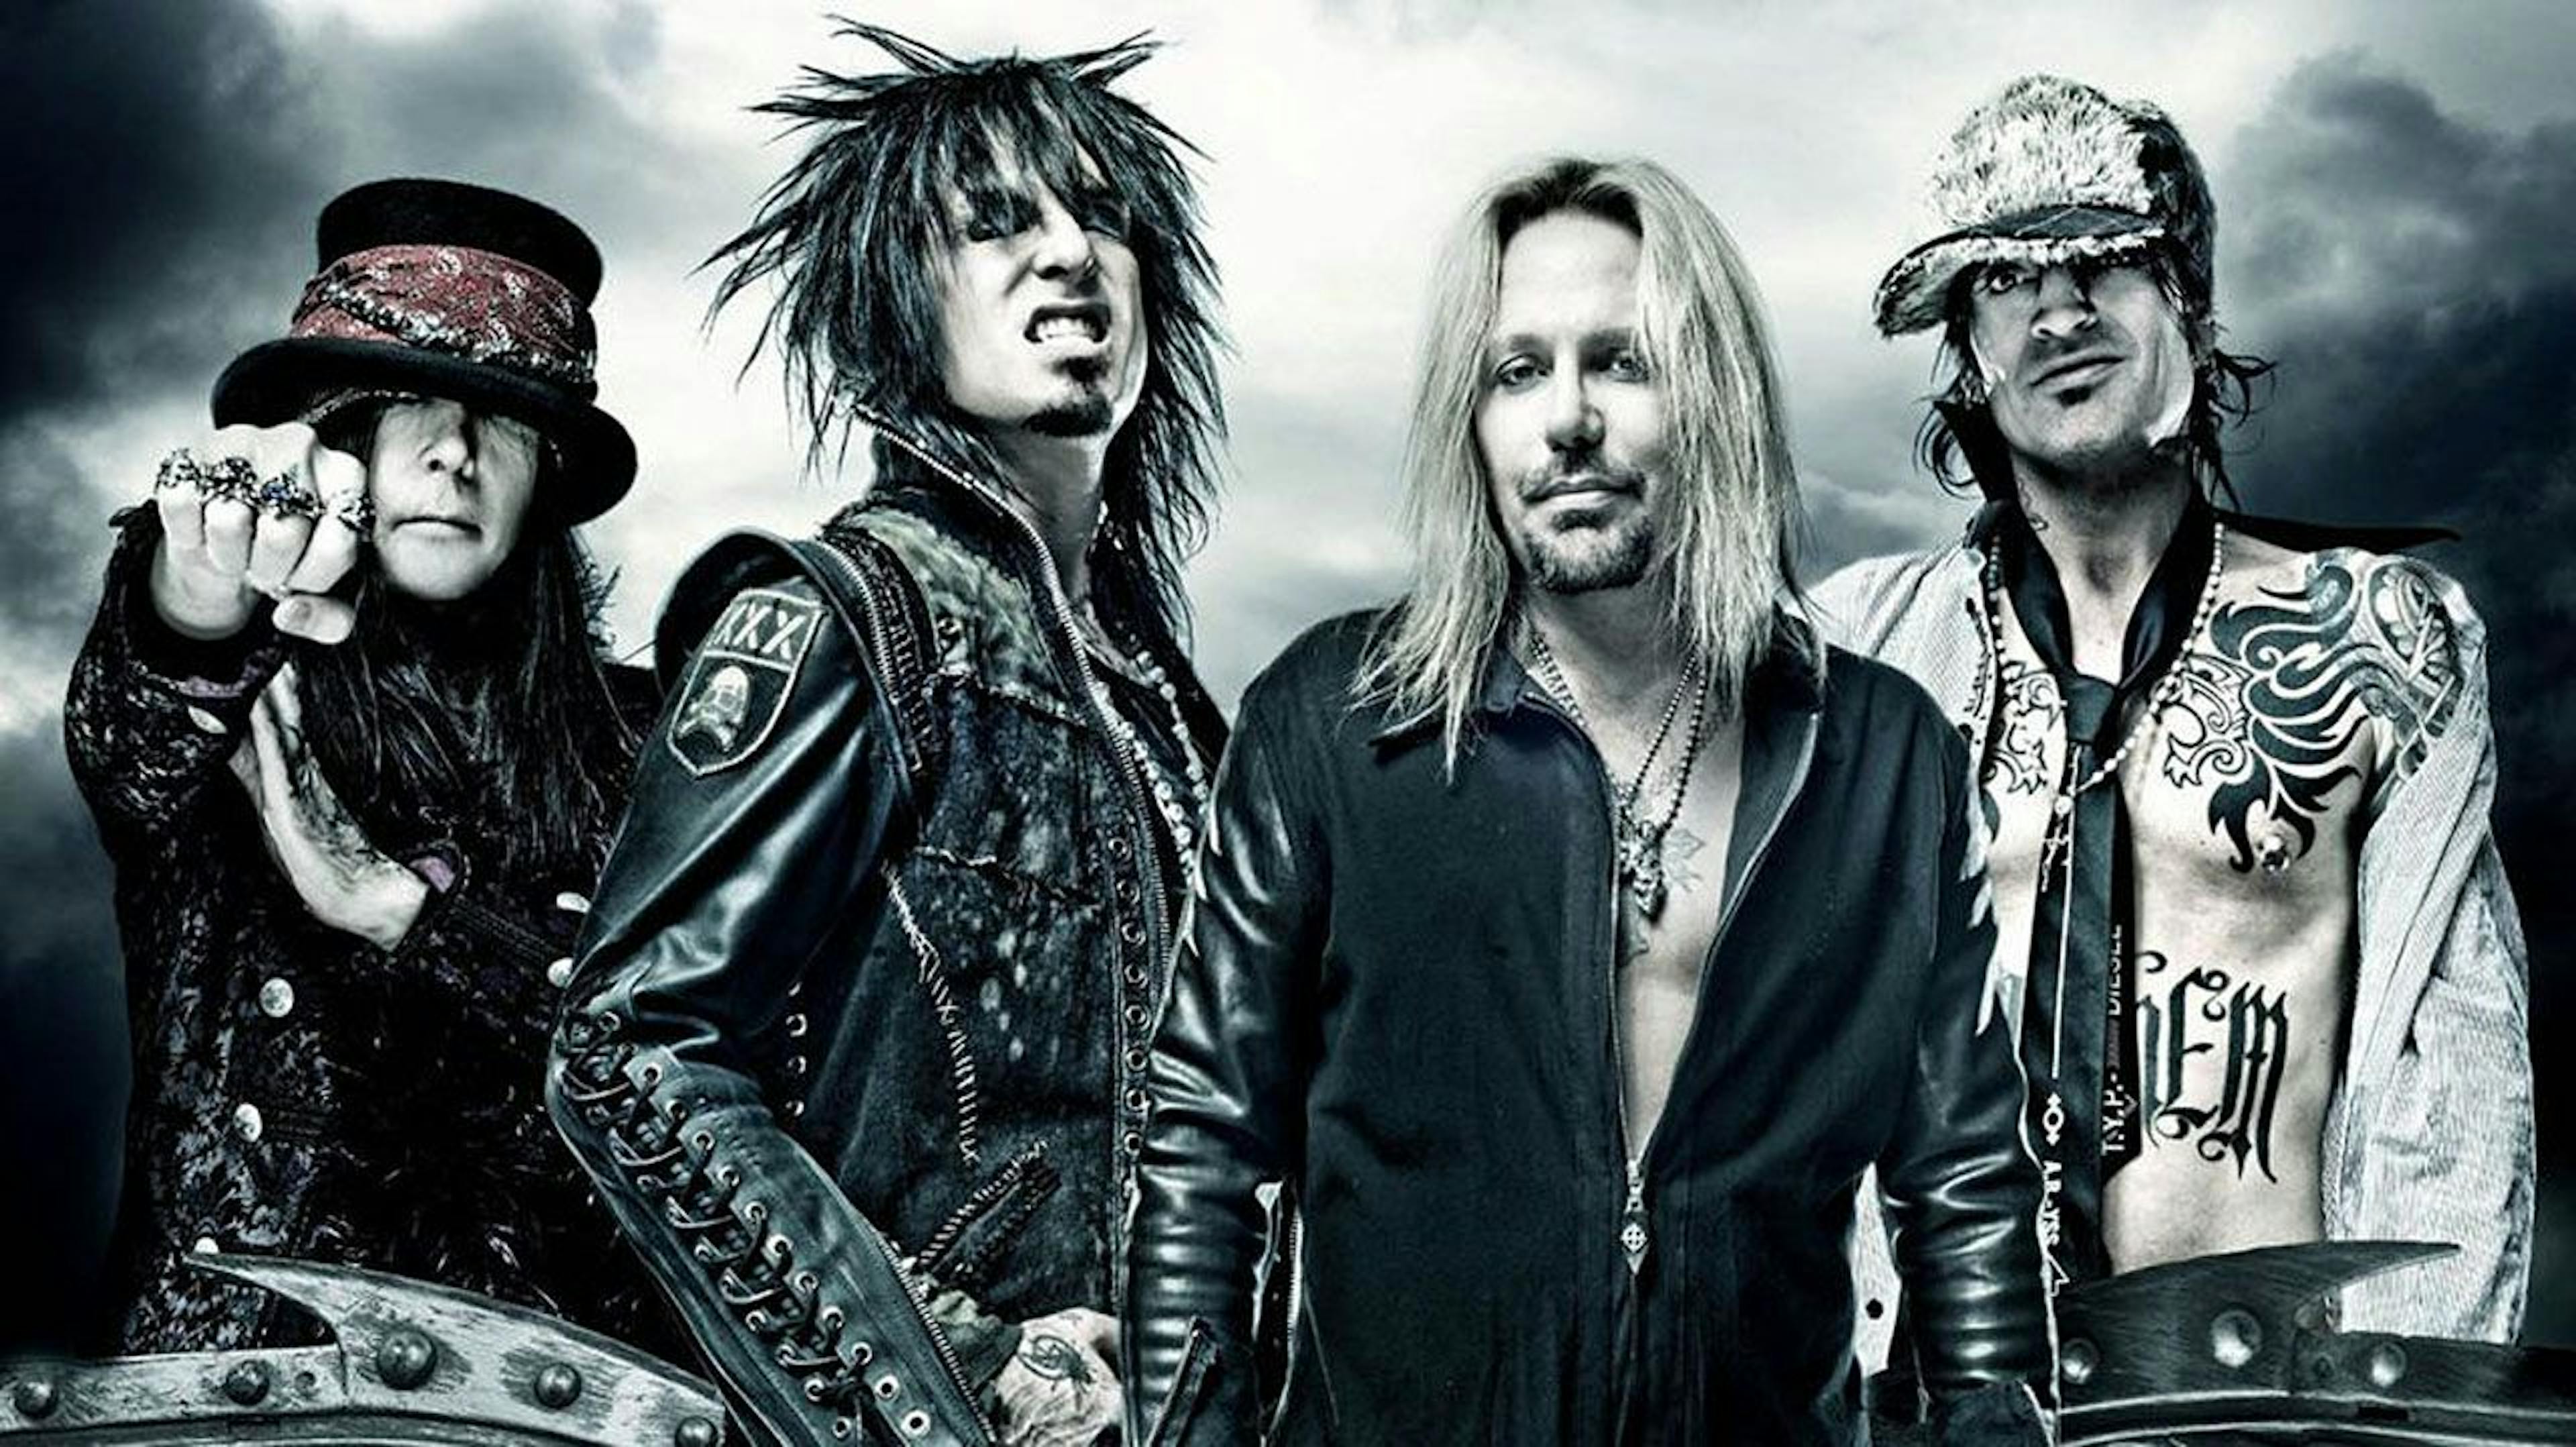 Mick Mars Said He Would Invite "The World To Come For Free" If Mötley Crüe Reunited